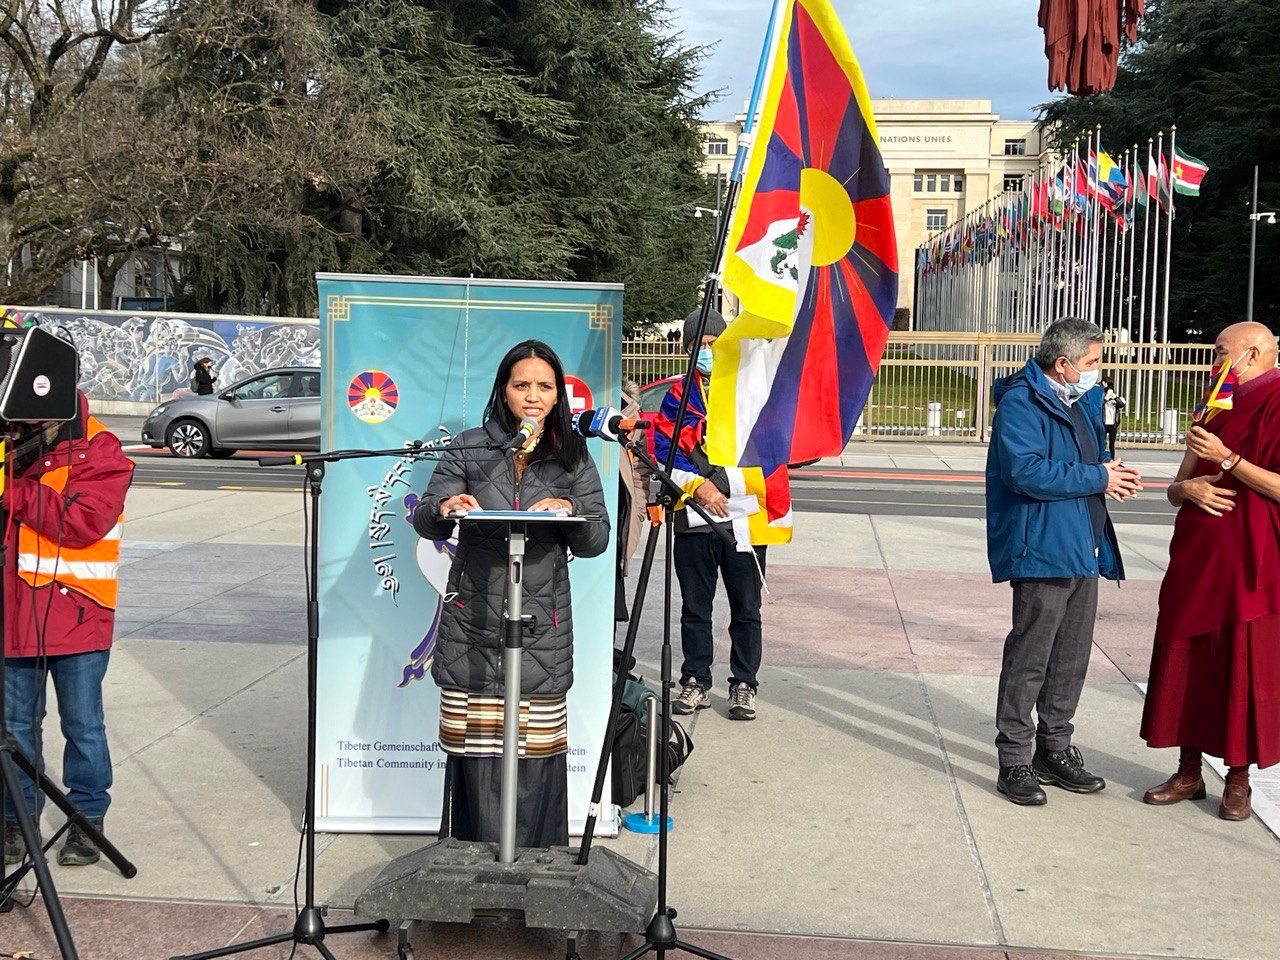 1f037212 13b0 417b bbd9 e7a8c0a95834 2 Tibetan Communities in Switzerland and Germany Call for Diplomatic Boycott of Beijing Olympics 2022